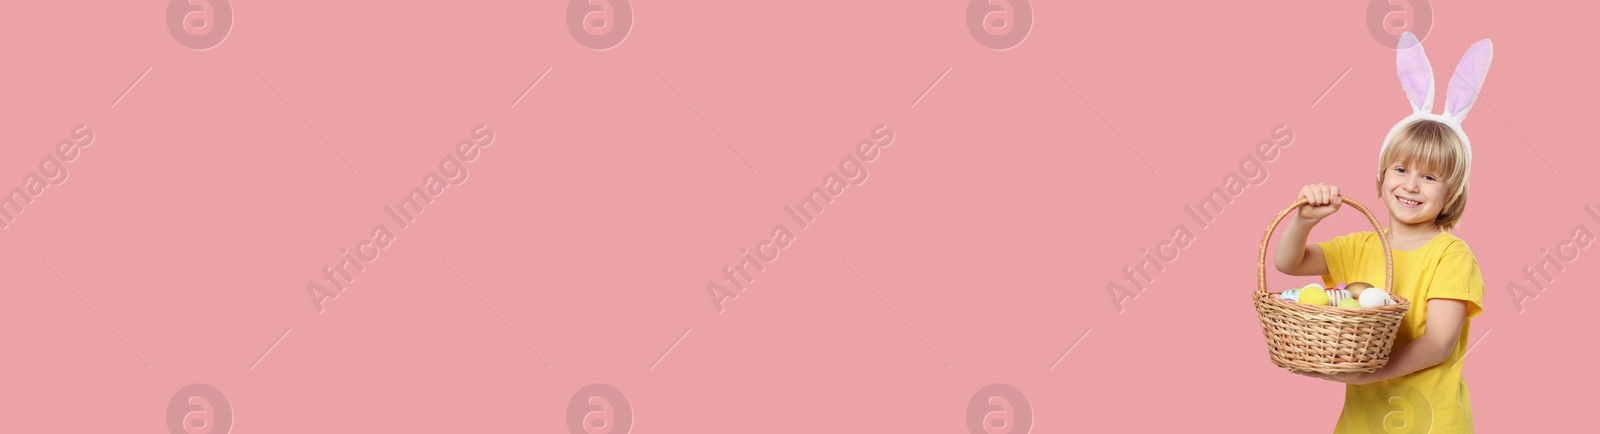 Image of Happy boy with bunny ears holding basket full of Easter eggs on pink background, space for text. Banner design